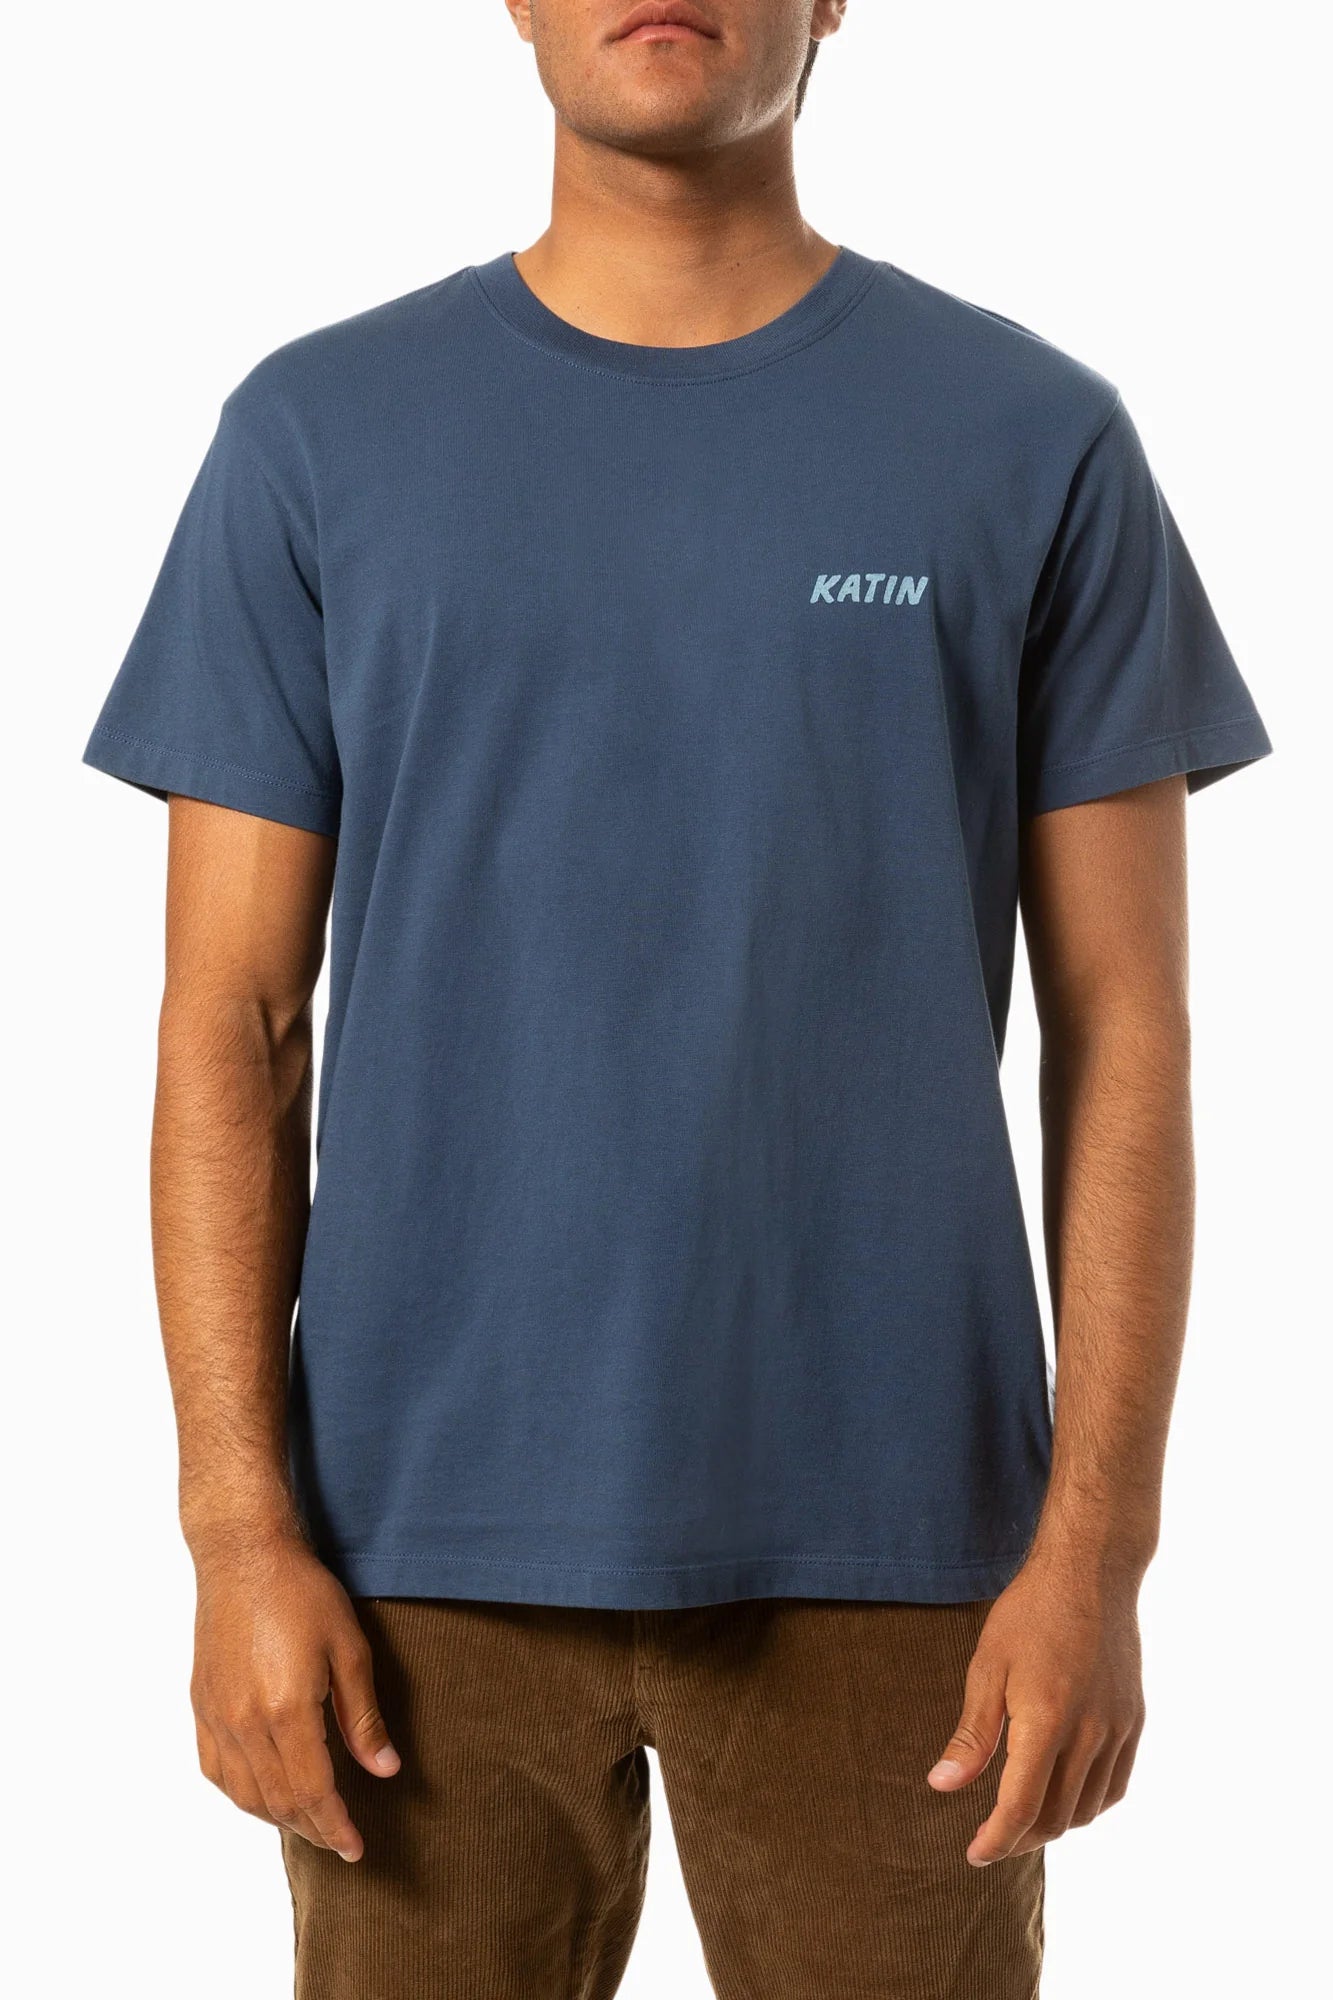 Swift Tee "Washed Blue"